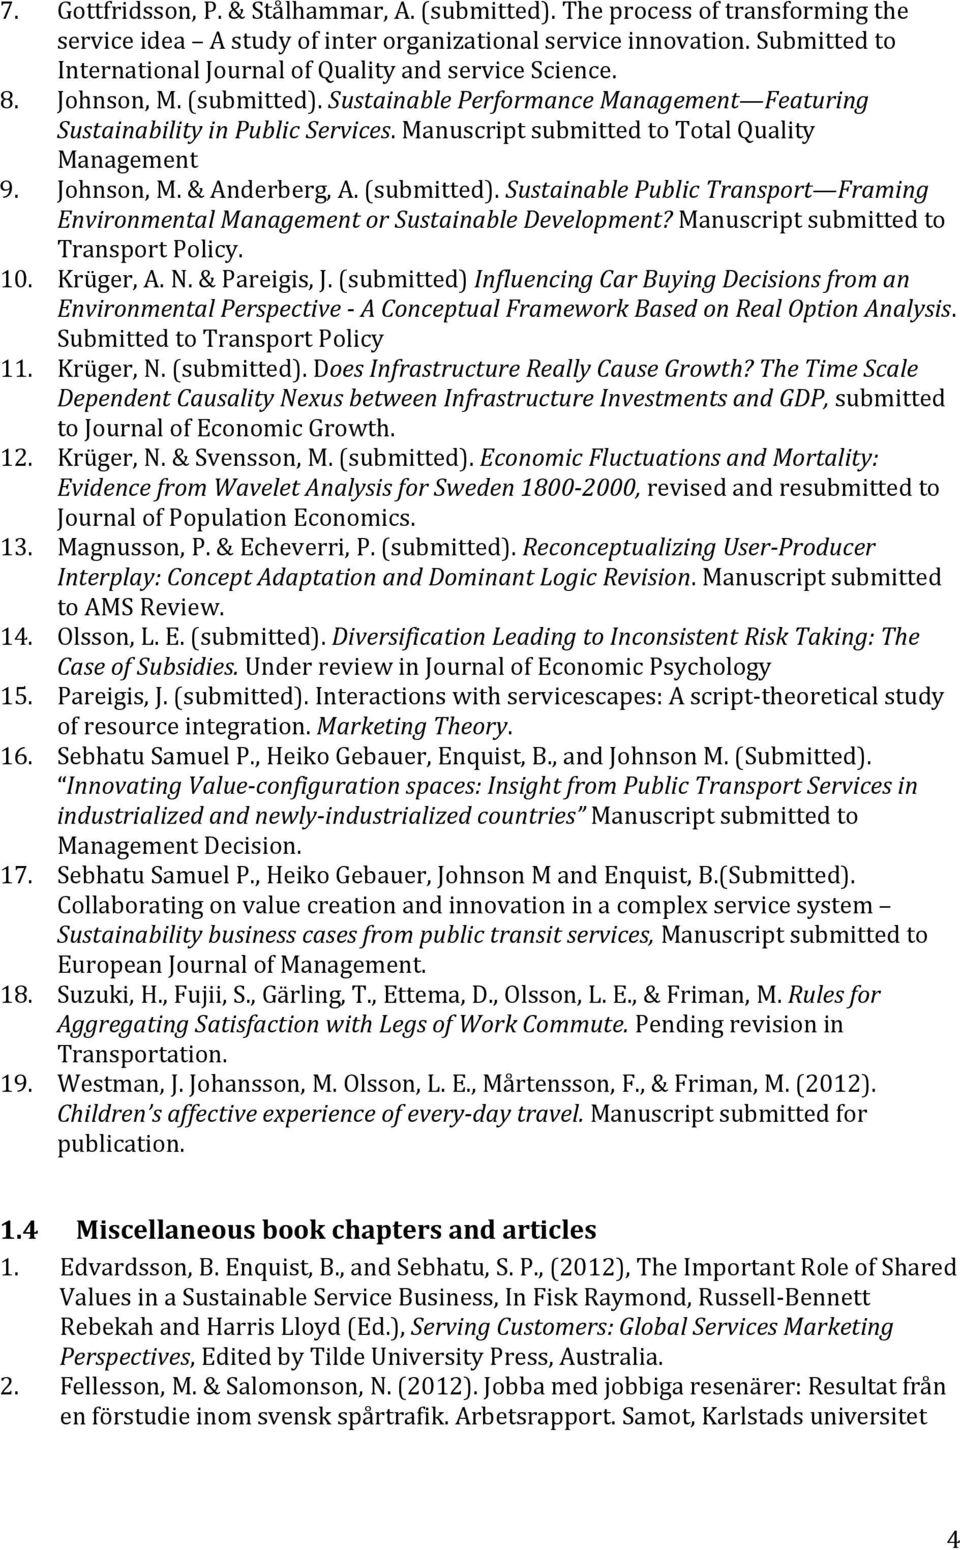 Manuscript submitted to Total Quality Management 9. Johnson, M. & Anderberg, A. (submitted). Sustainable Public Transport Framing Environmental Management or Sustainable Development?